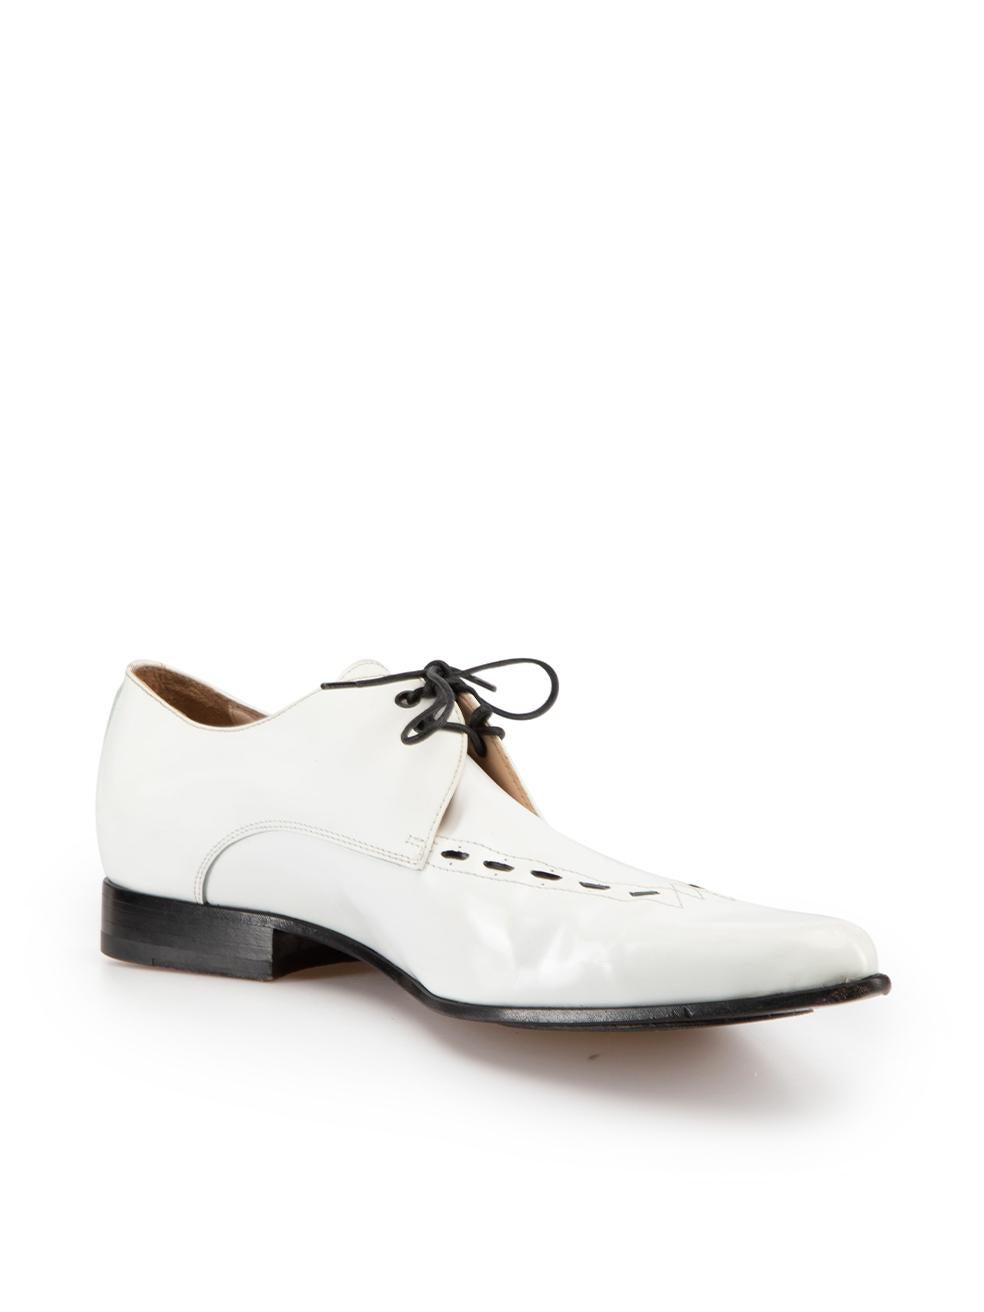 CONDITION is Very good. Minimal wear to shoes is evident. Minimal wear to the exterior of both with minor scratching and scuffs, particularly at the toes on this used John Galliano designer resale item.



Details


White

Leather

Brogue